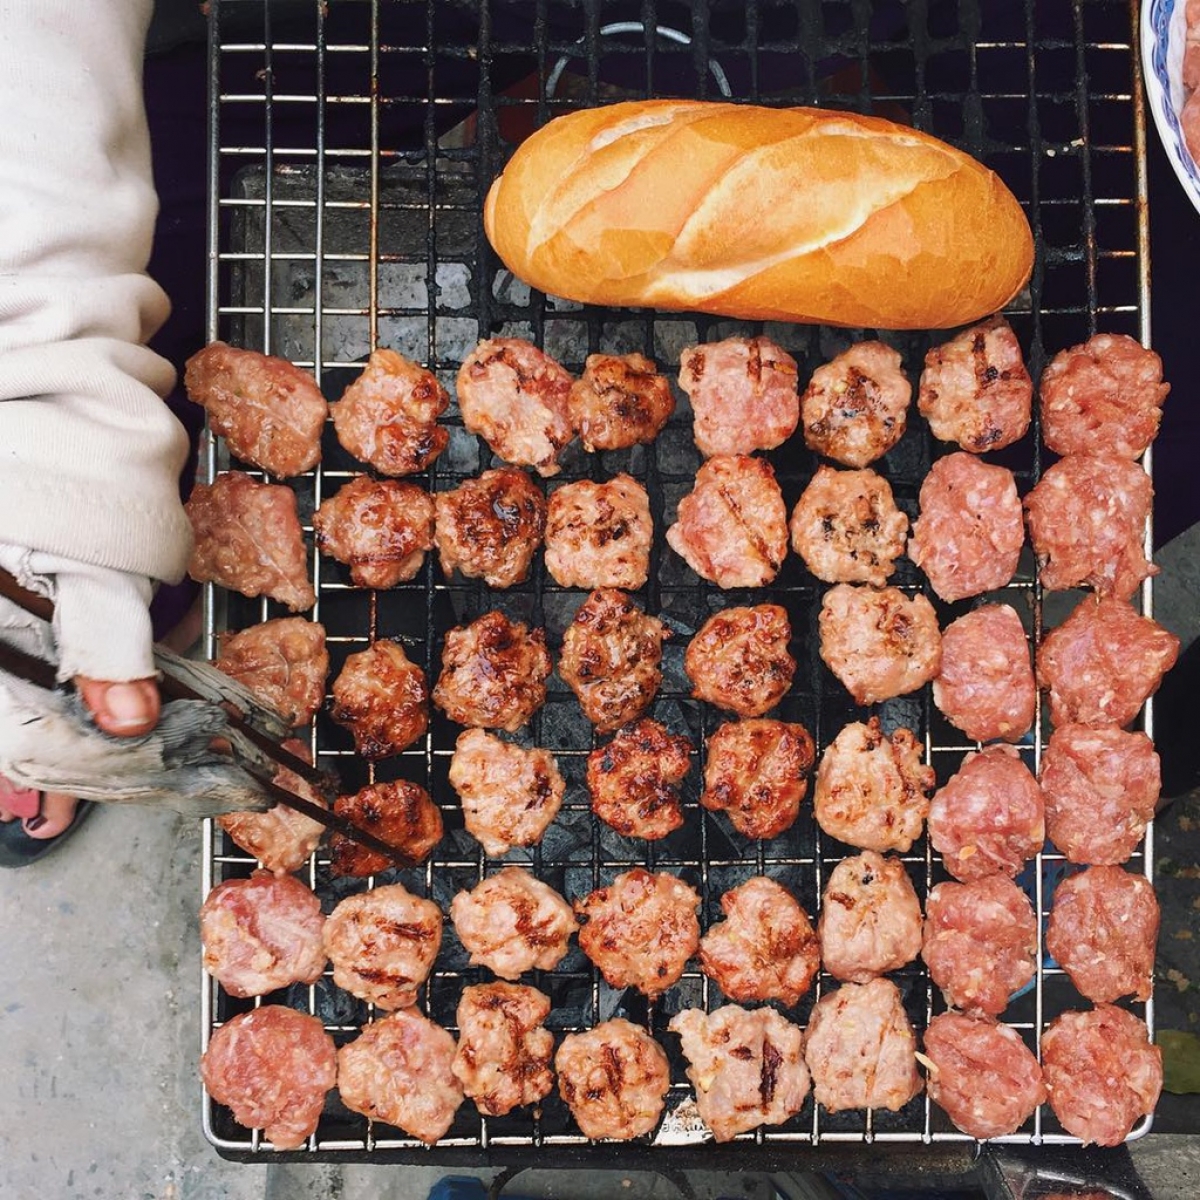 Grilled meat 37 is honoured as one of the 12 best street foods in the world by website concierge.com of travel magazine Condé Nast Traveler from the United States. (Photo: Taipeieats)